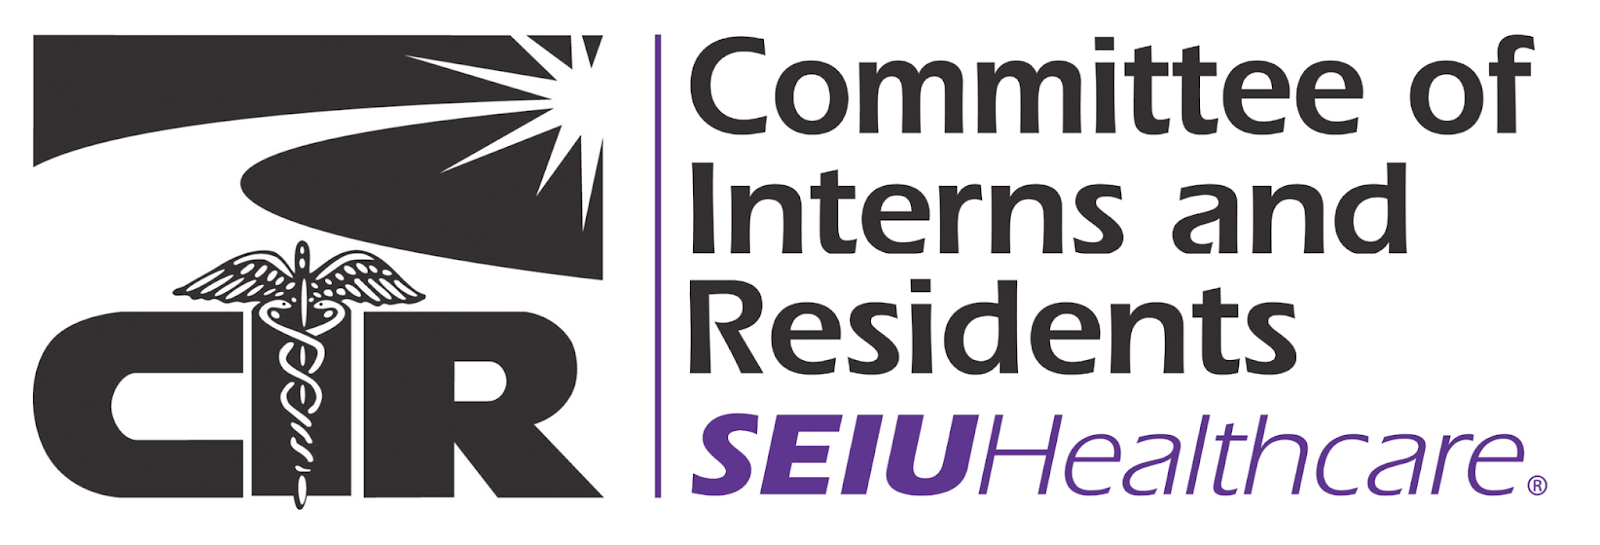 Committee of Interns and Residents - SEIU Healthcare